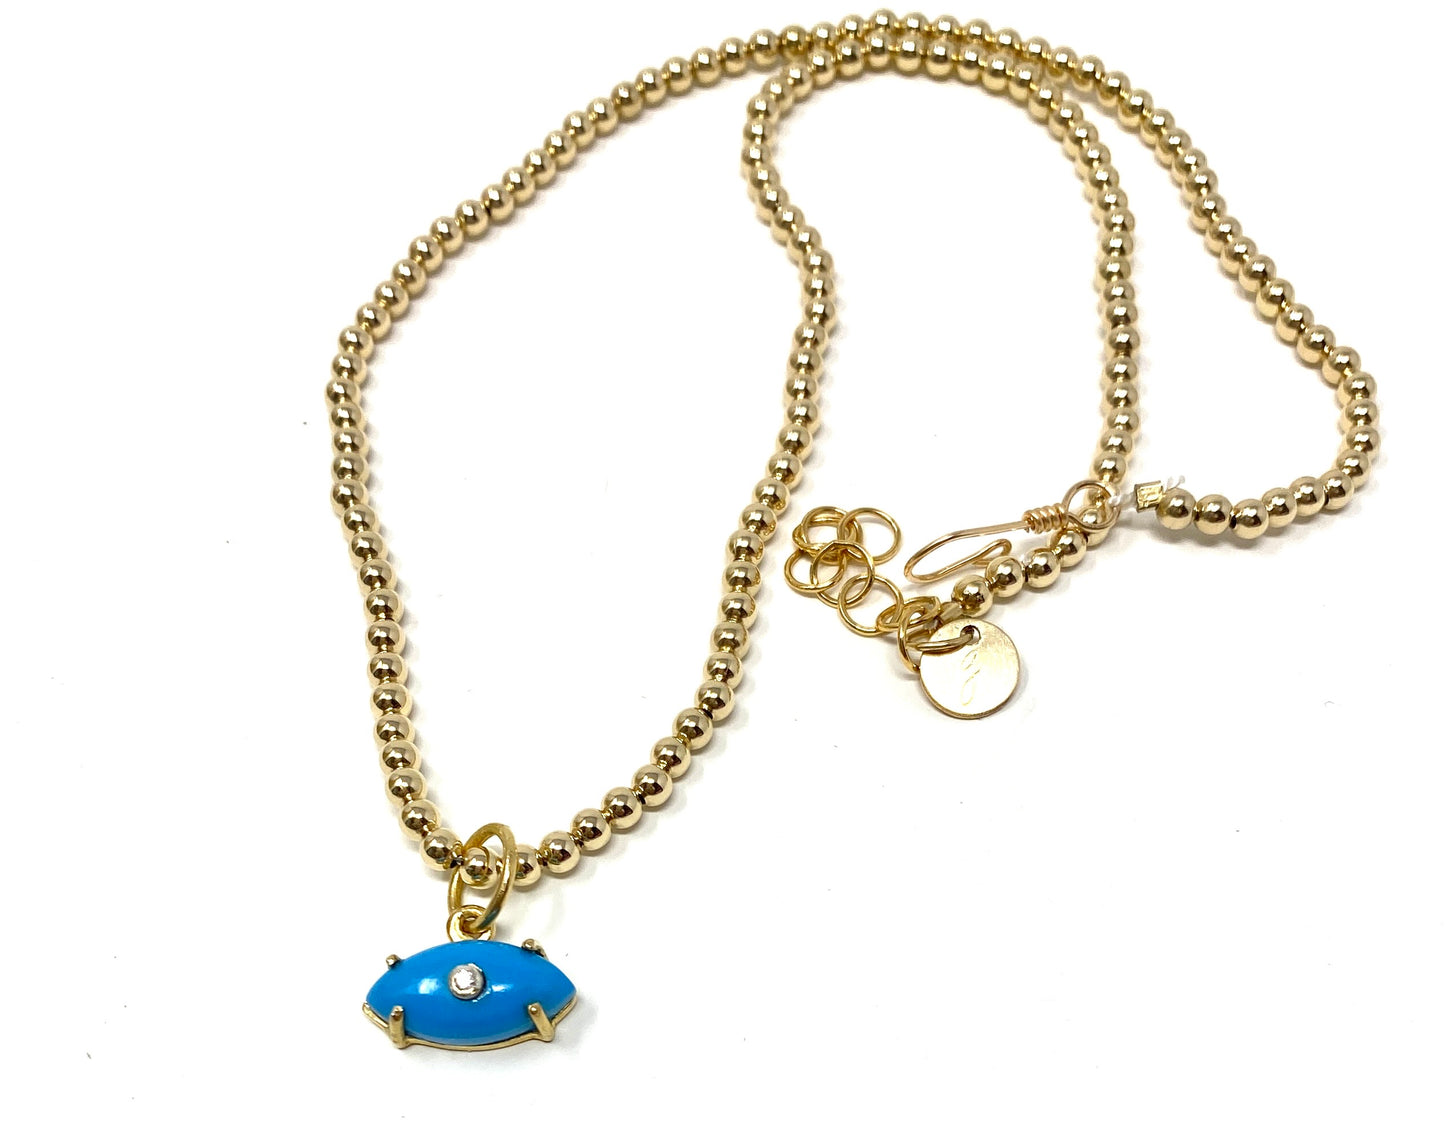 3mm Gold Filled Beaded Necklace With Turquoise and Diamond Pendant